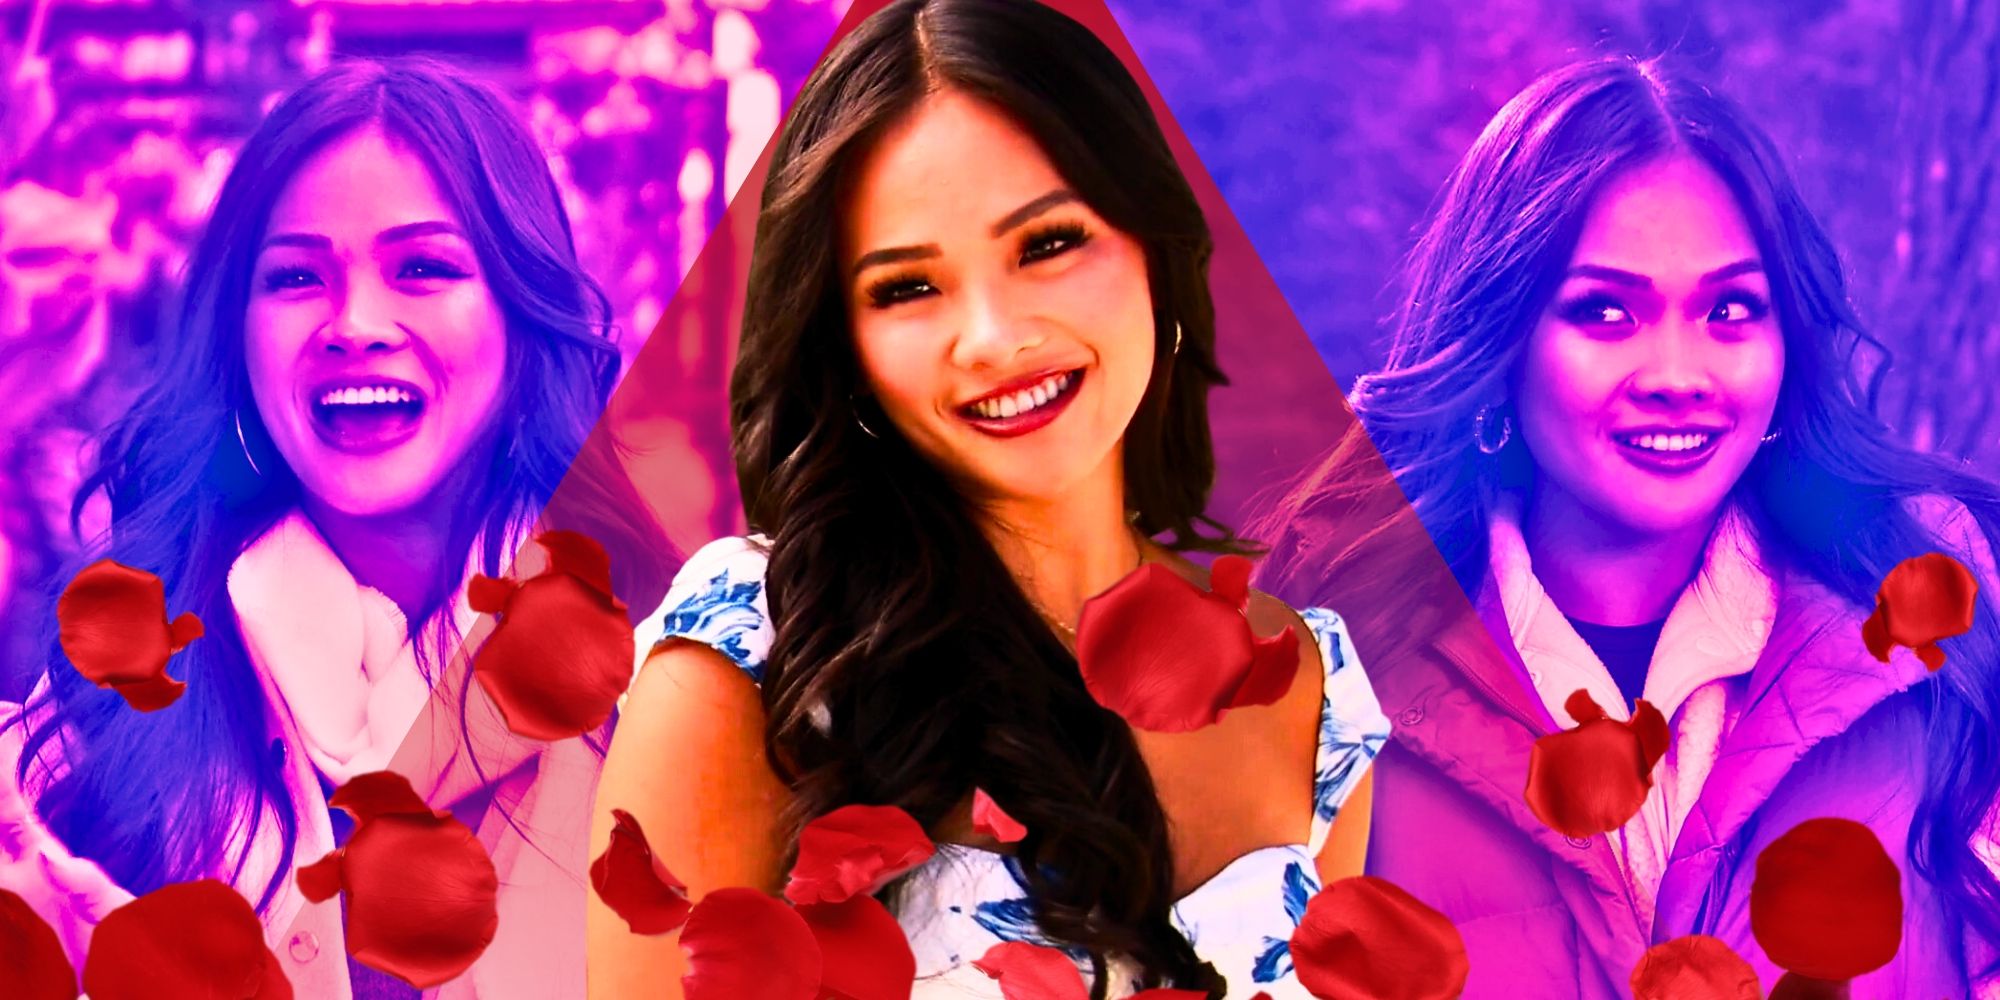 The Bachelor Season 28’s Jenn Tran With A Photo Montage and Rose Petals